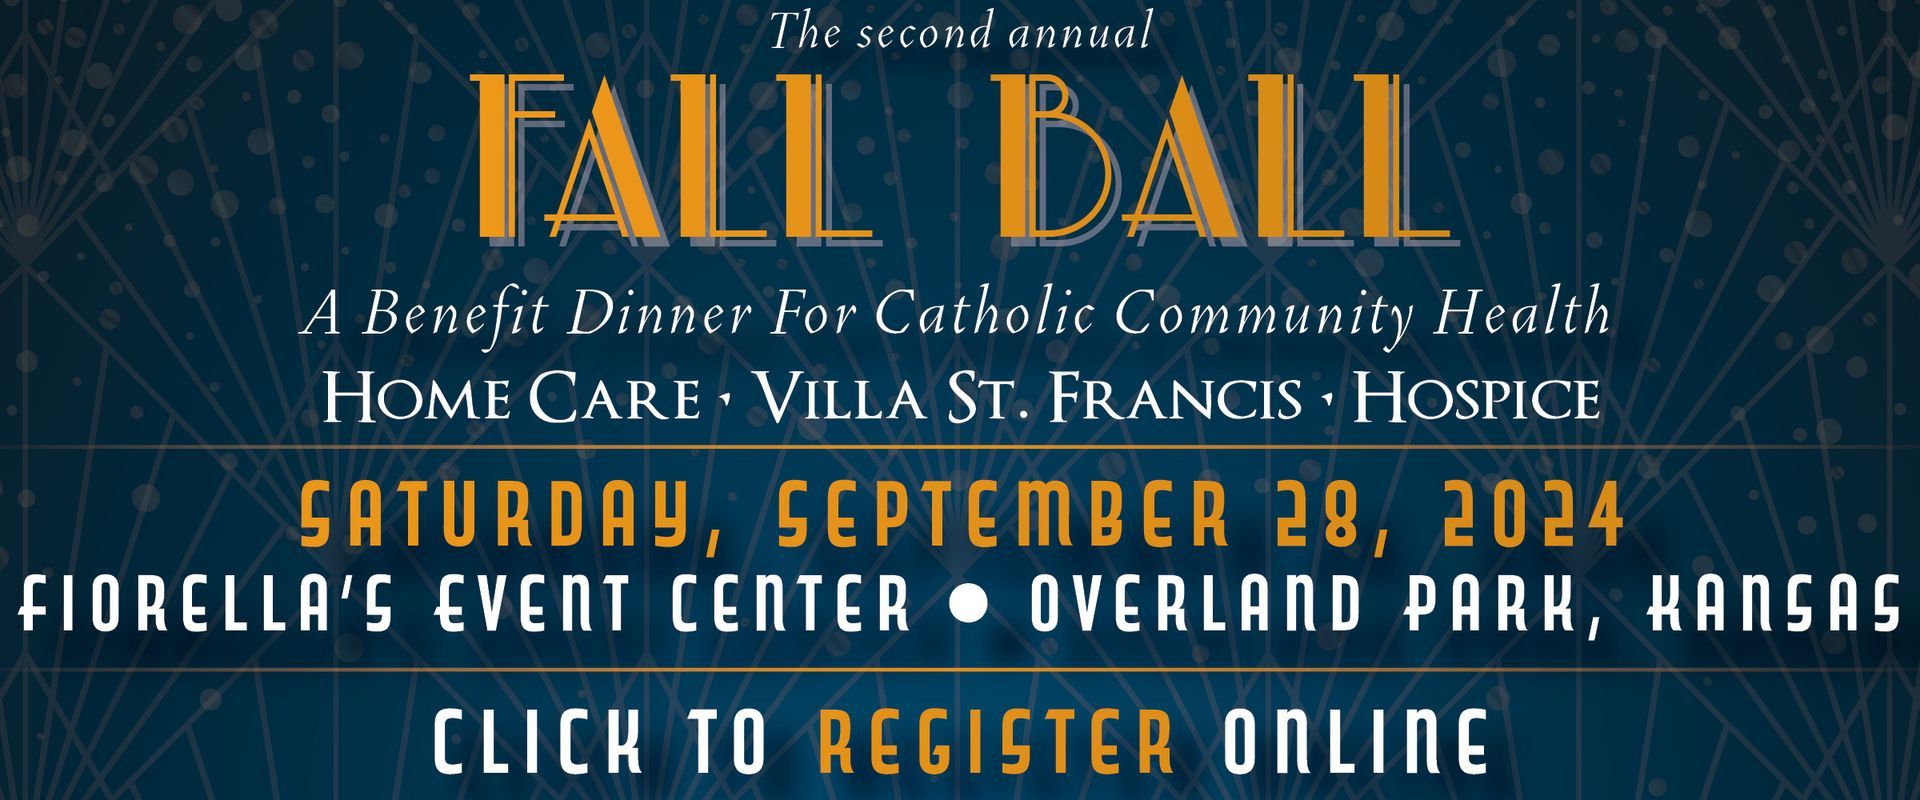 Join us for the second annual Fall Ball. Click the link to register online.